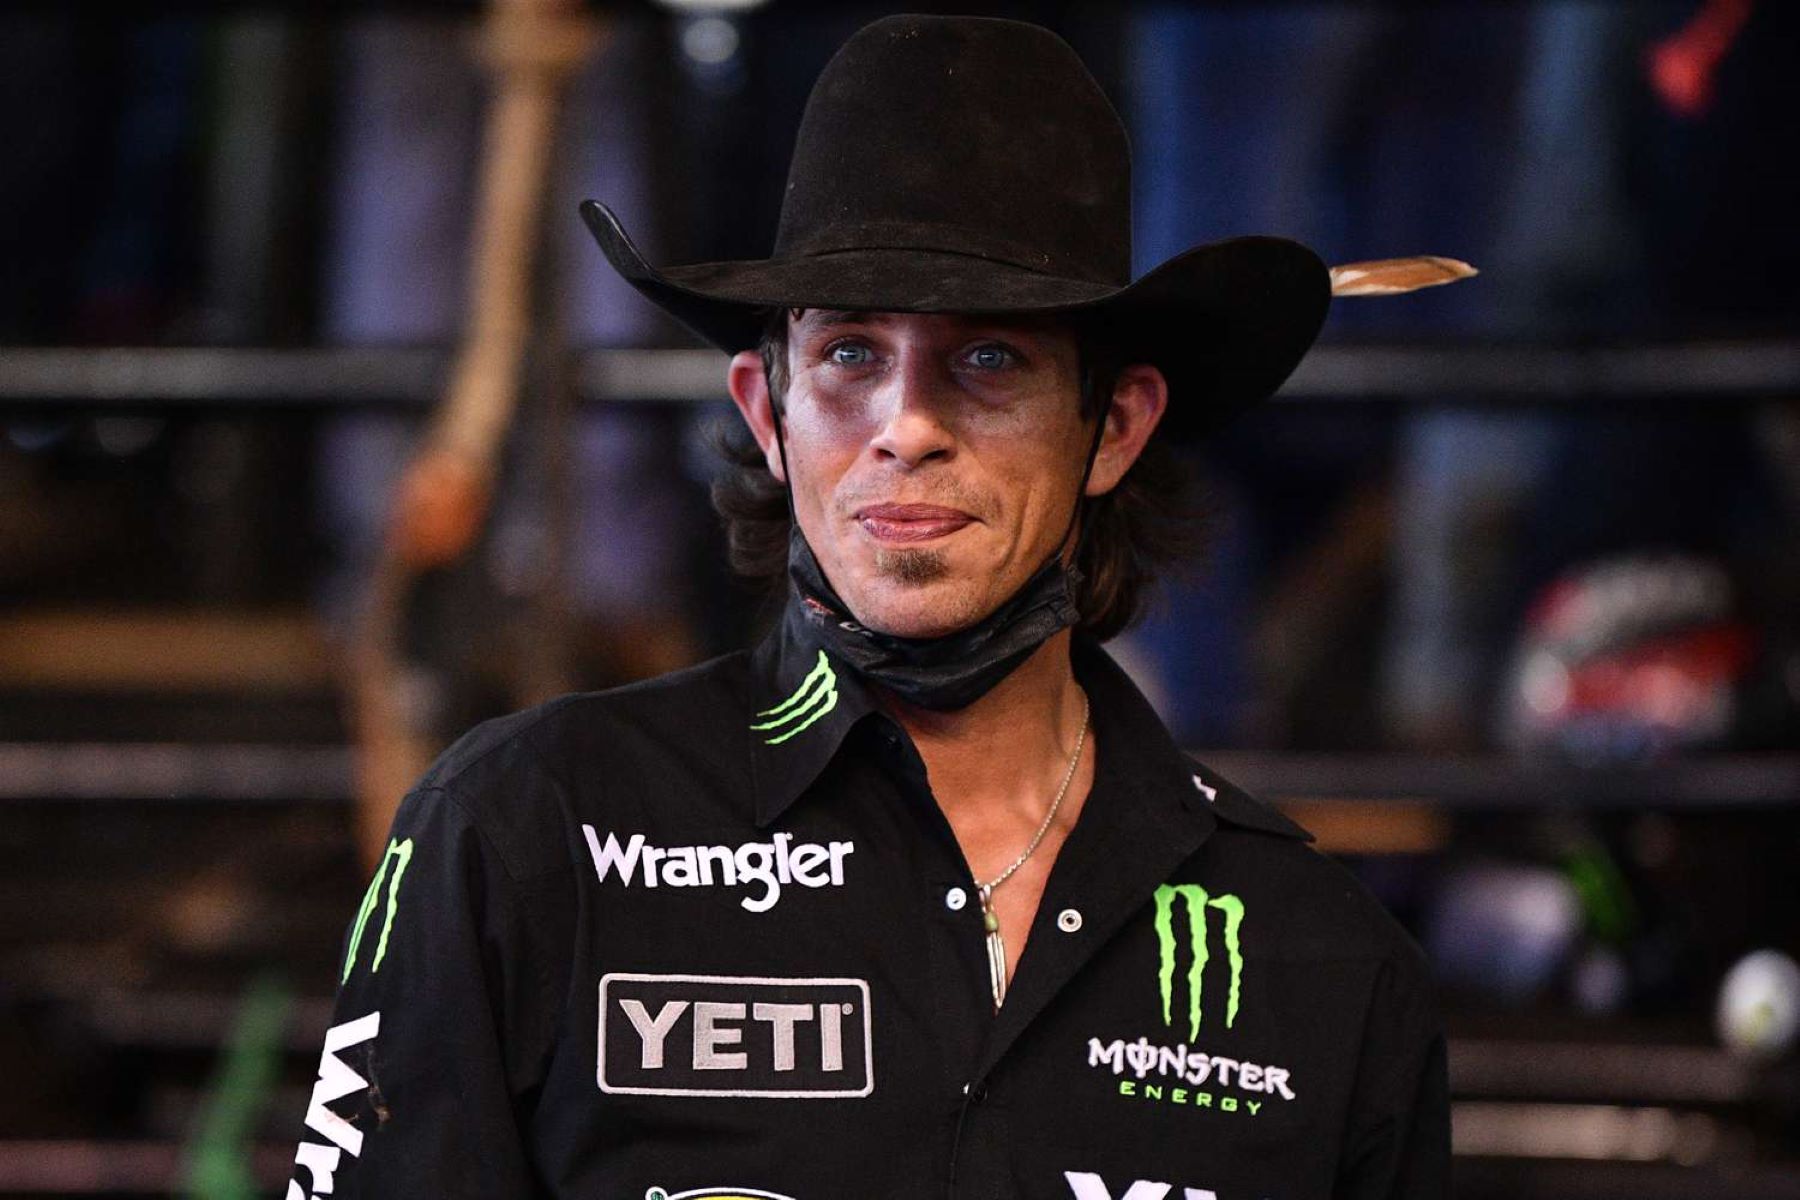 Bull Riding Champion J.B. Mauney Retires After Breaking Neck In Accident